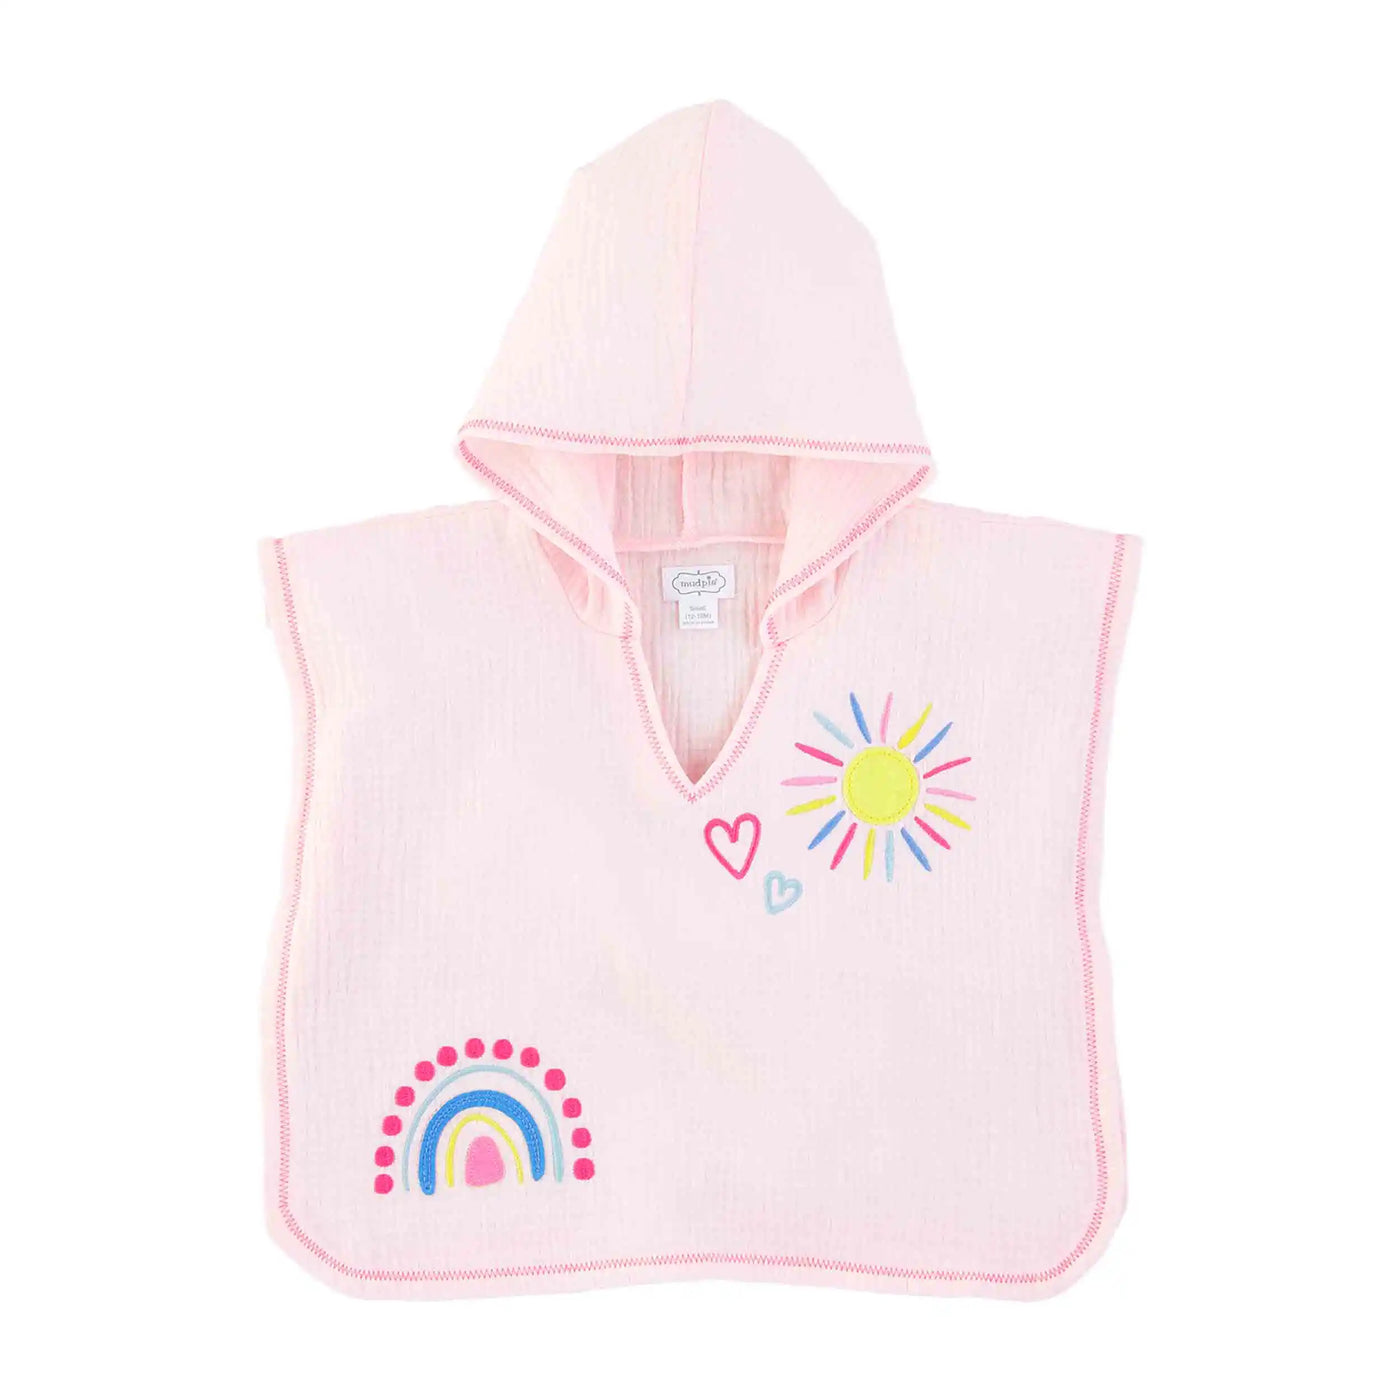 Girls' Rainbow Poncho Cover Up BY MUDPIE